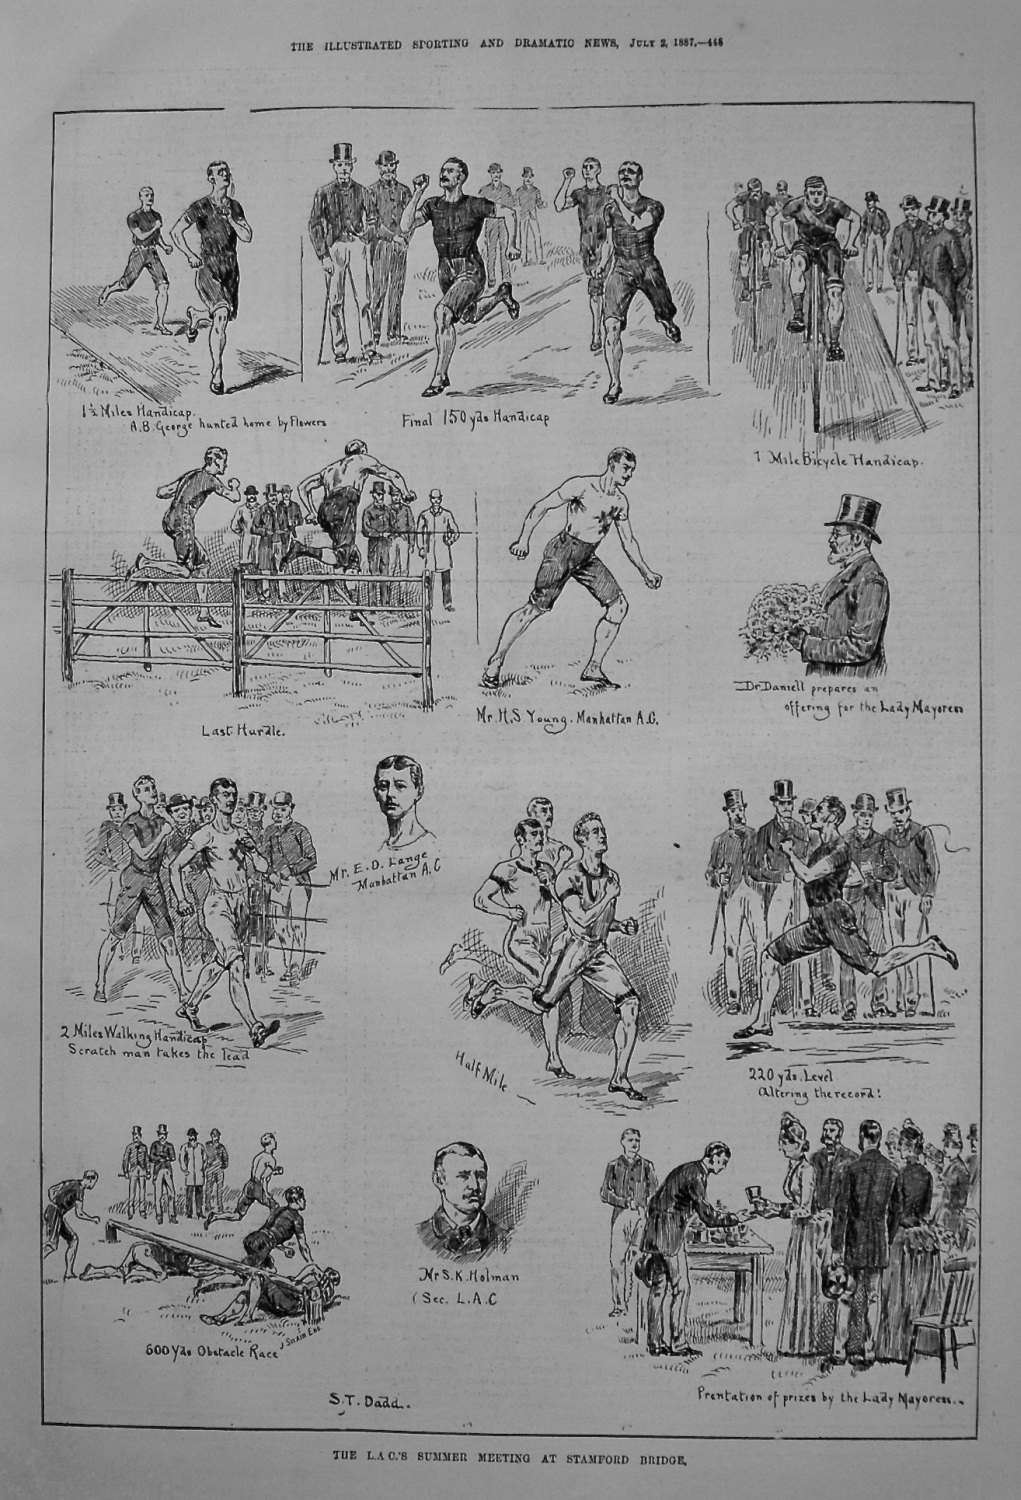 The L.A.C.'S Summer Meeting at Stamford Bridge. 1887